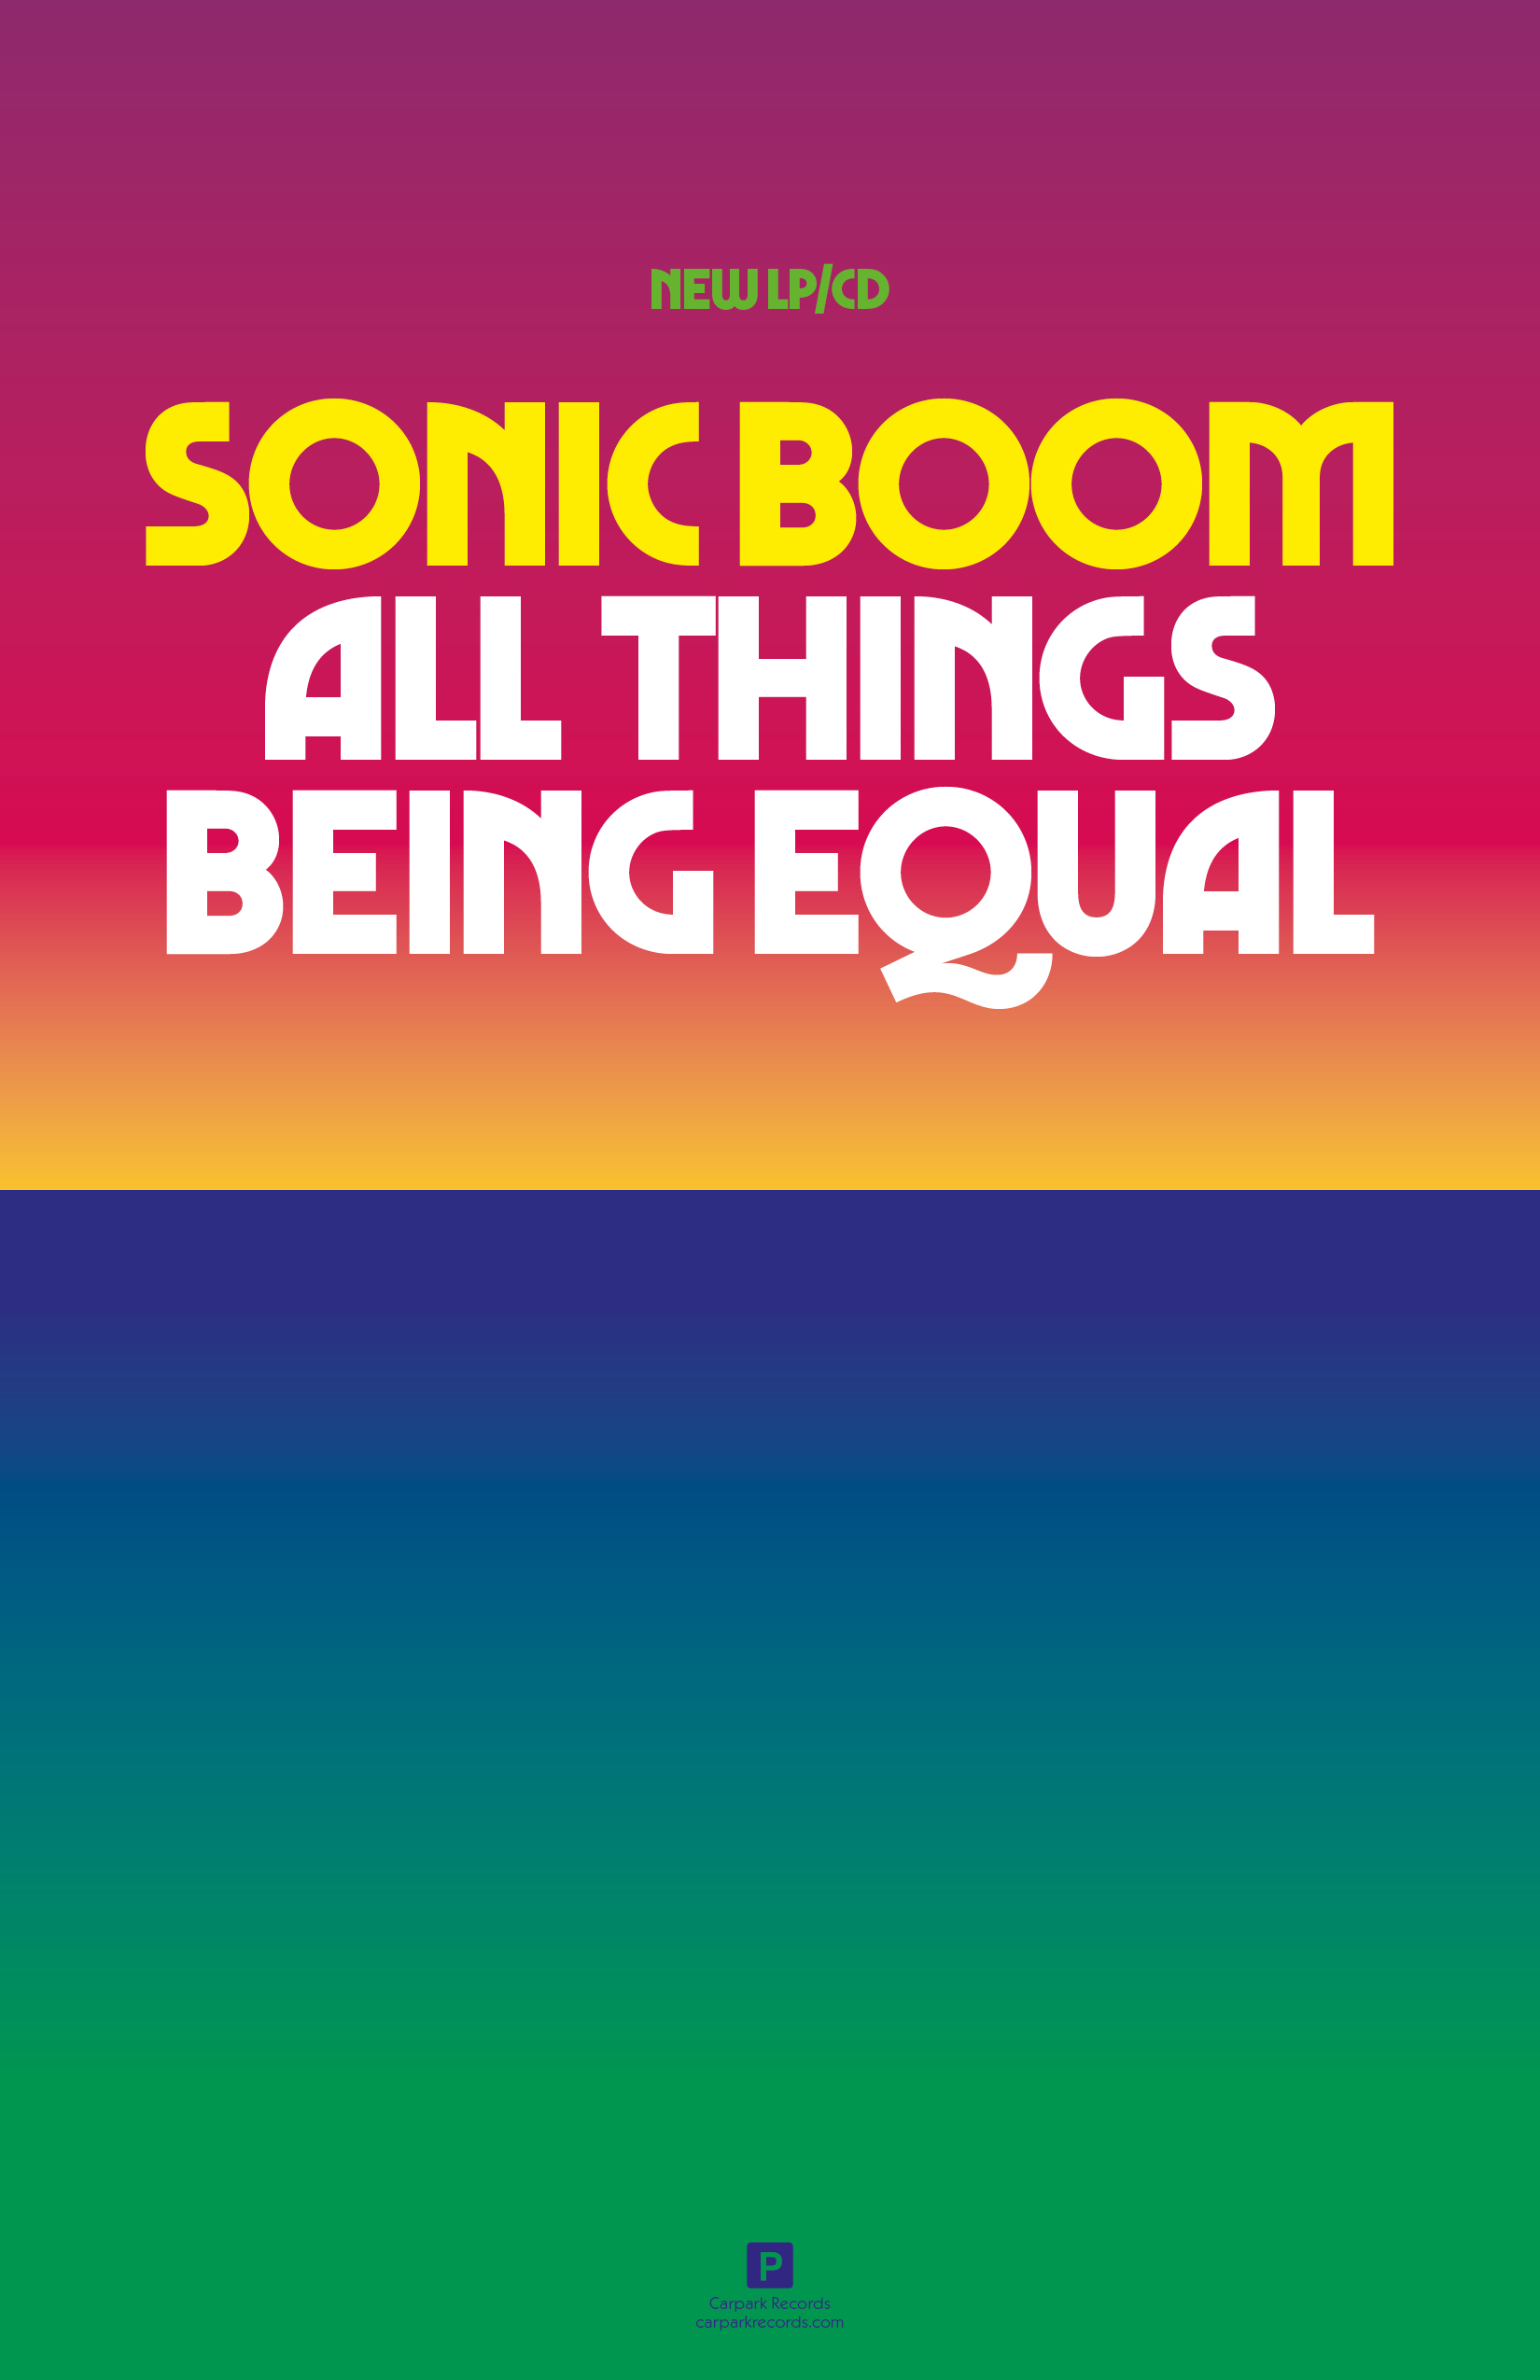 Sonic Boom 2020. New LP. All Things Being Equal.